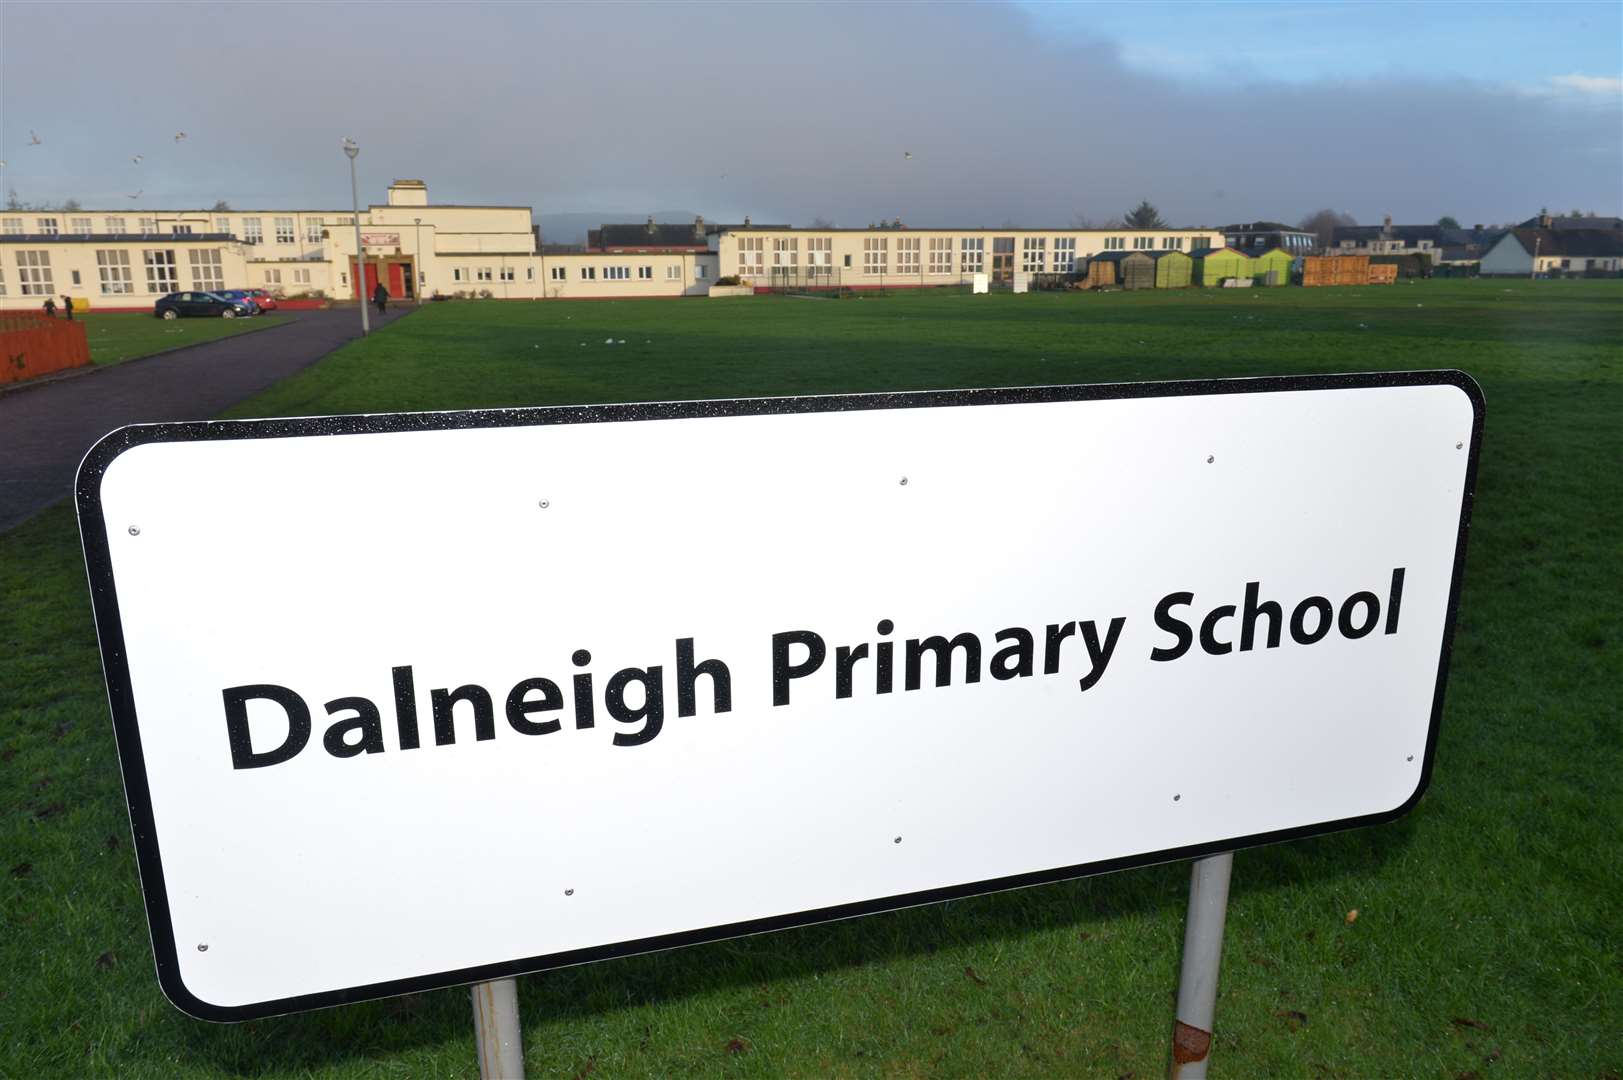 A pupil at Dalneigh Primary School has tested positive for coronavirus.